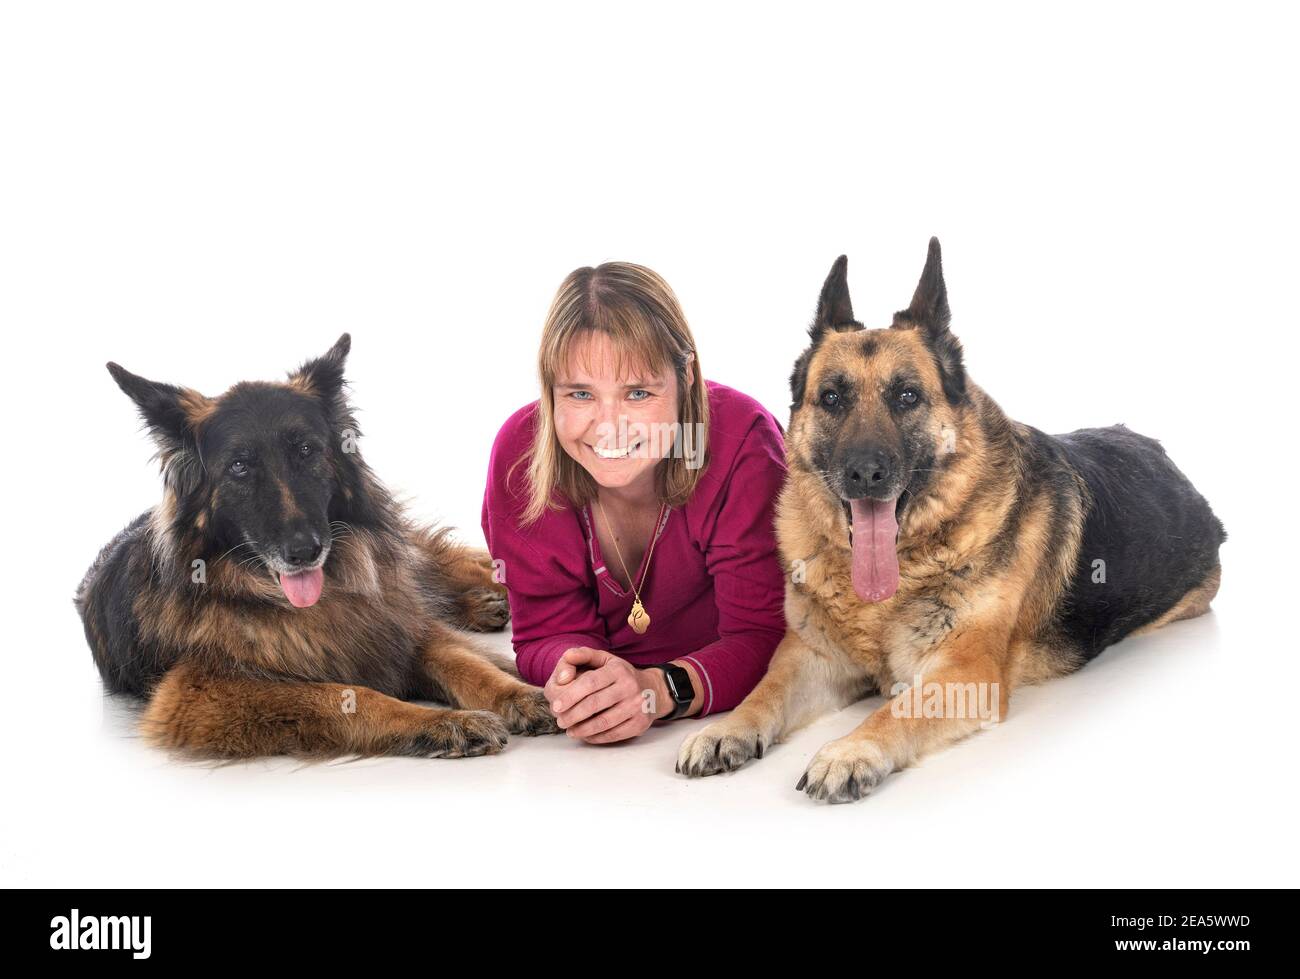 old german shepherds and woman in front of white background Stock Photo